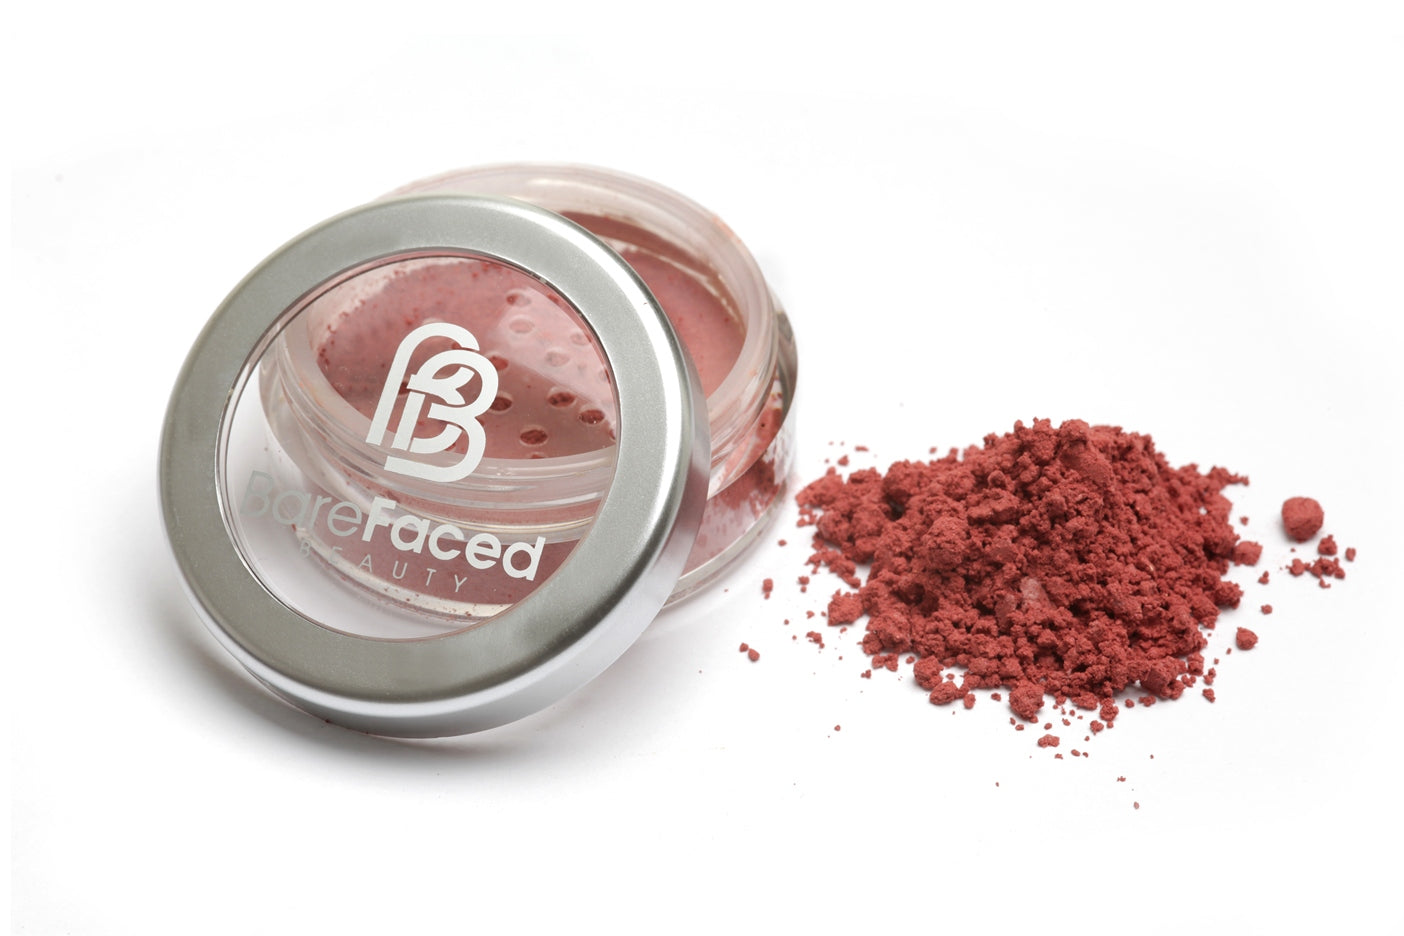 A small round pot of mineral blusher, with a swatch of the powder next to it showing a matt, rich rosey shade